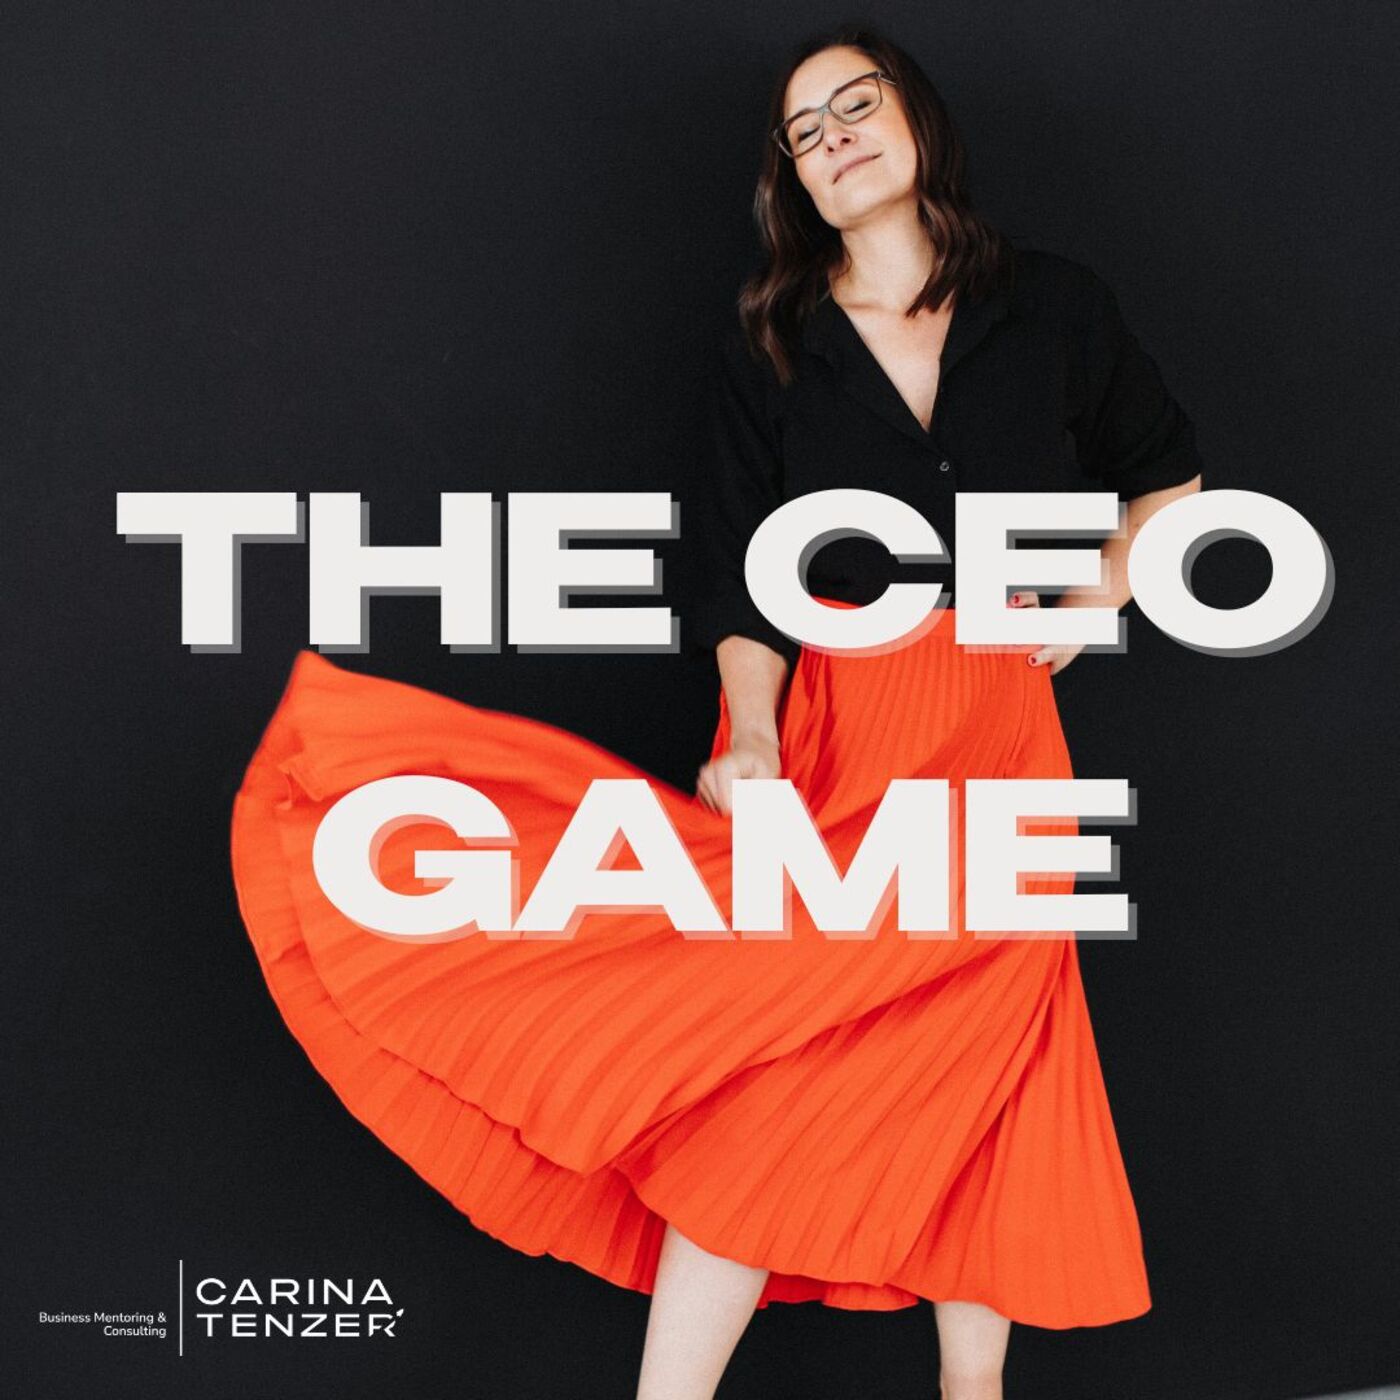 THE CEO GAME